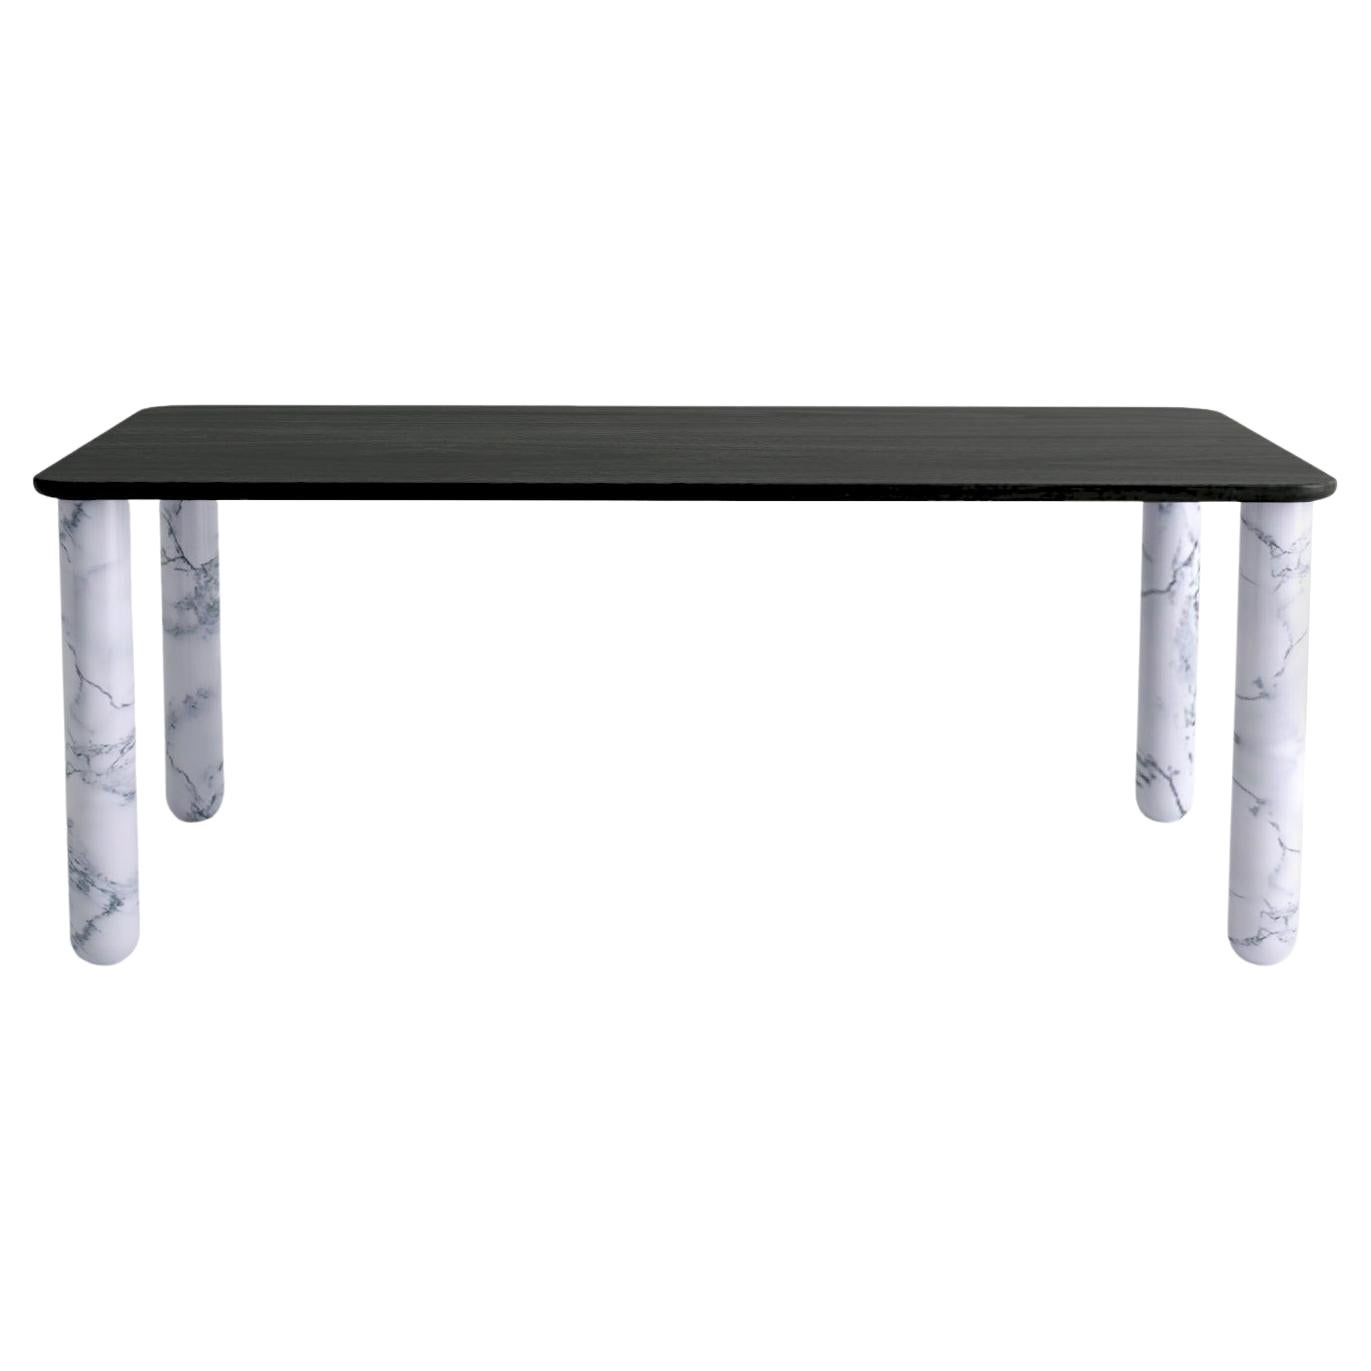 Xlarge Black Wood and White Marble "Sunday" Dining Table, Jean-Baptiste Souletie For Sale